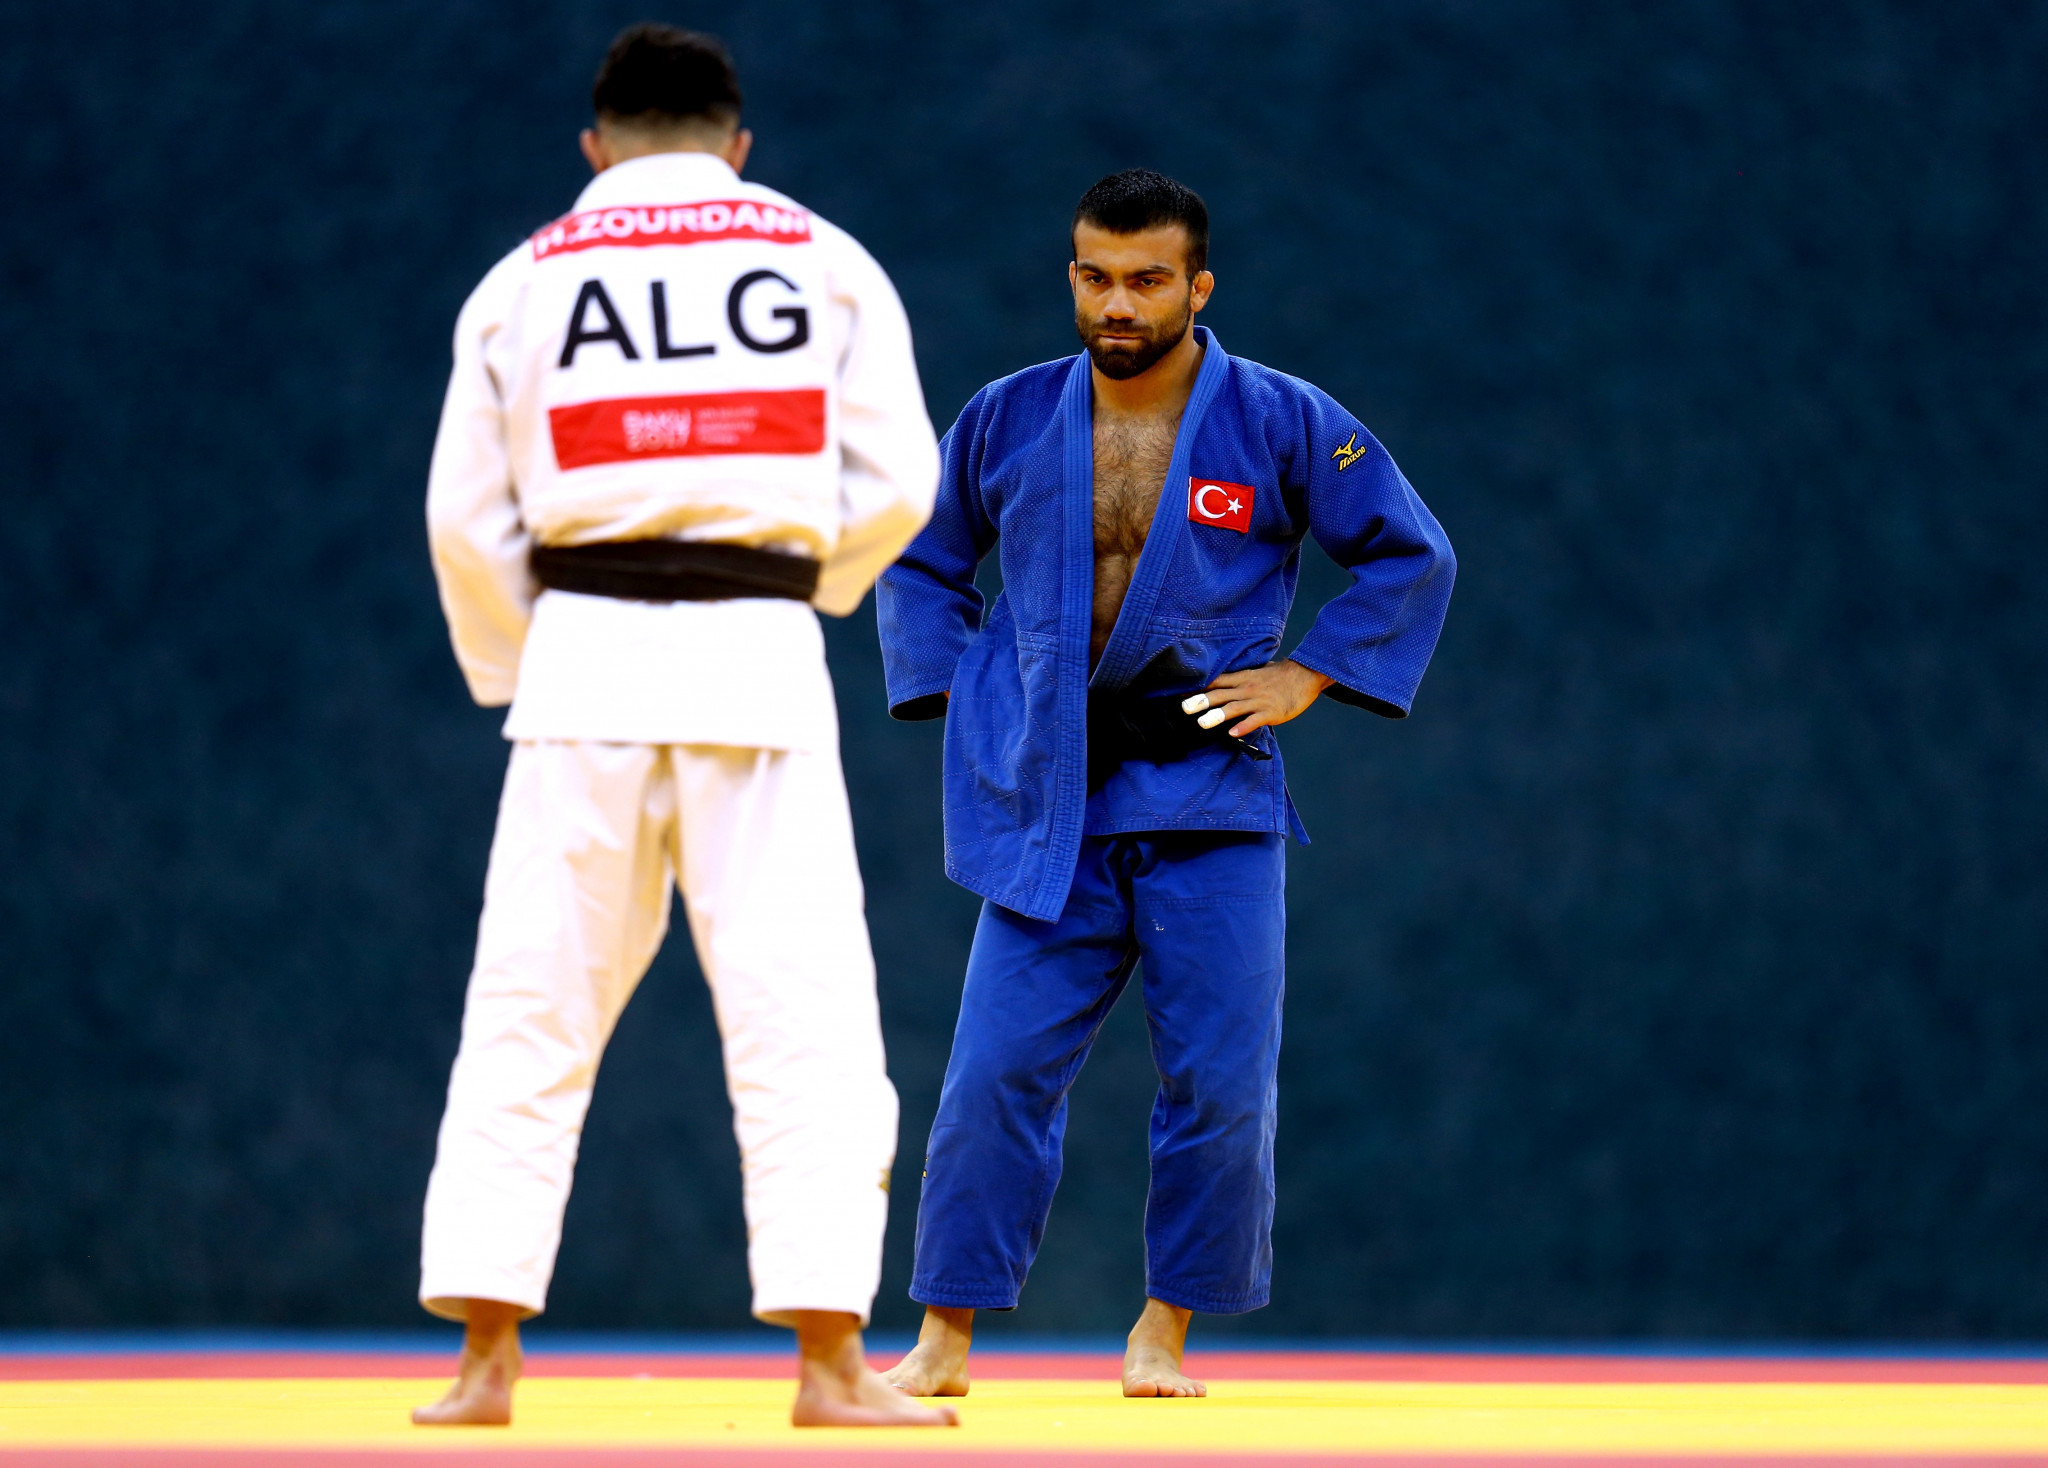 IJF deny claim Algerian athlete withdrew from World Championships to avoid Israel opponent